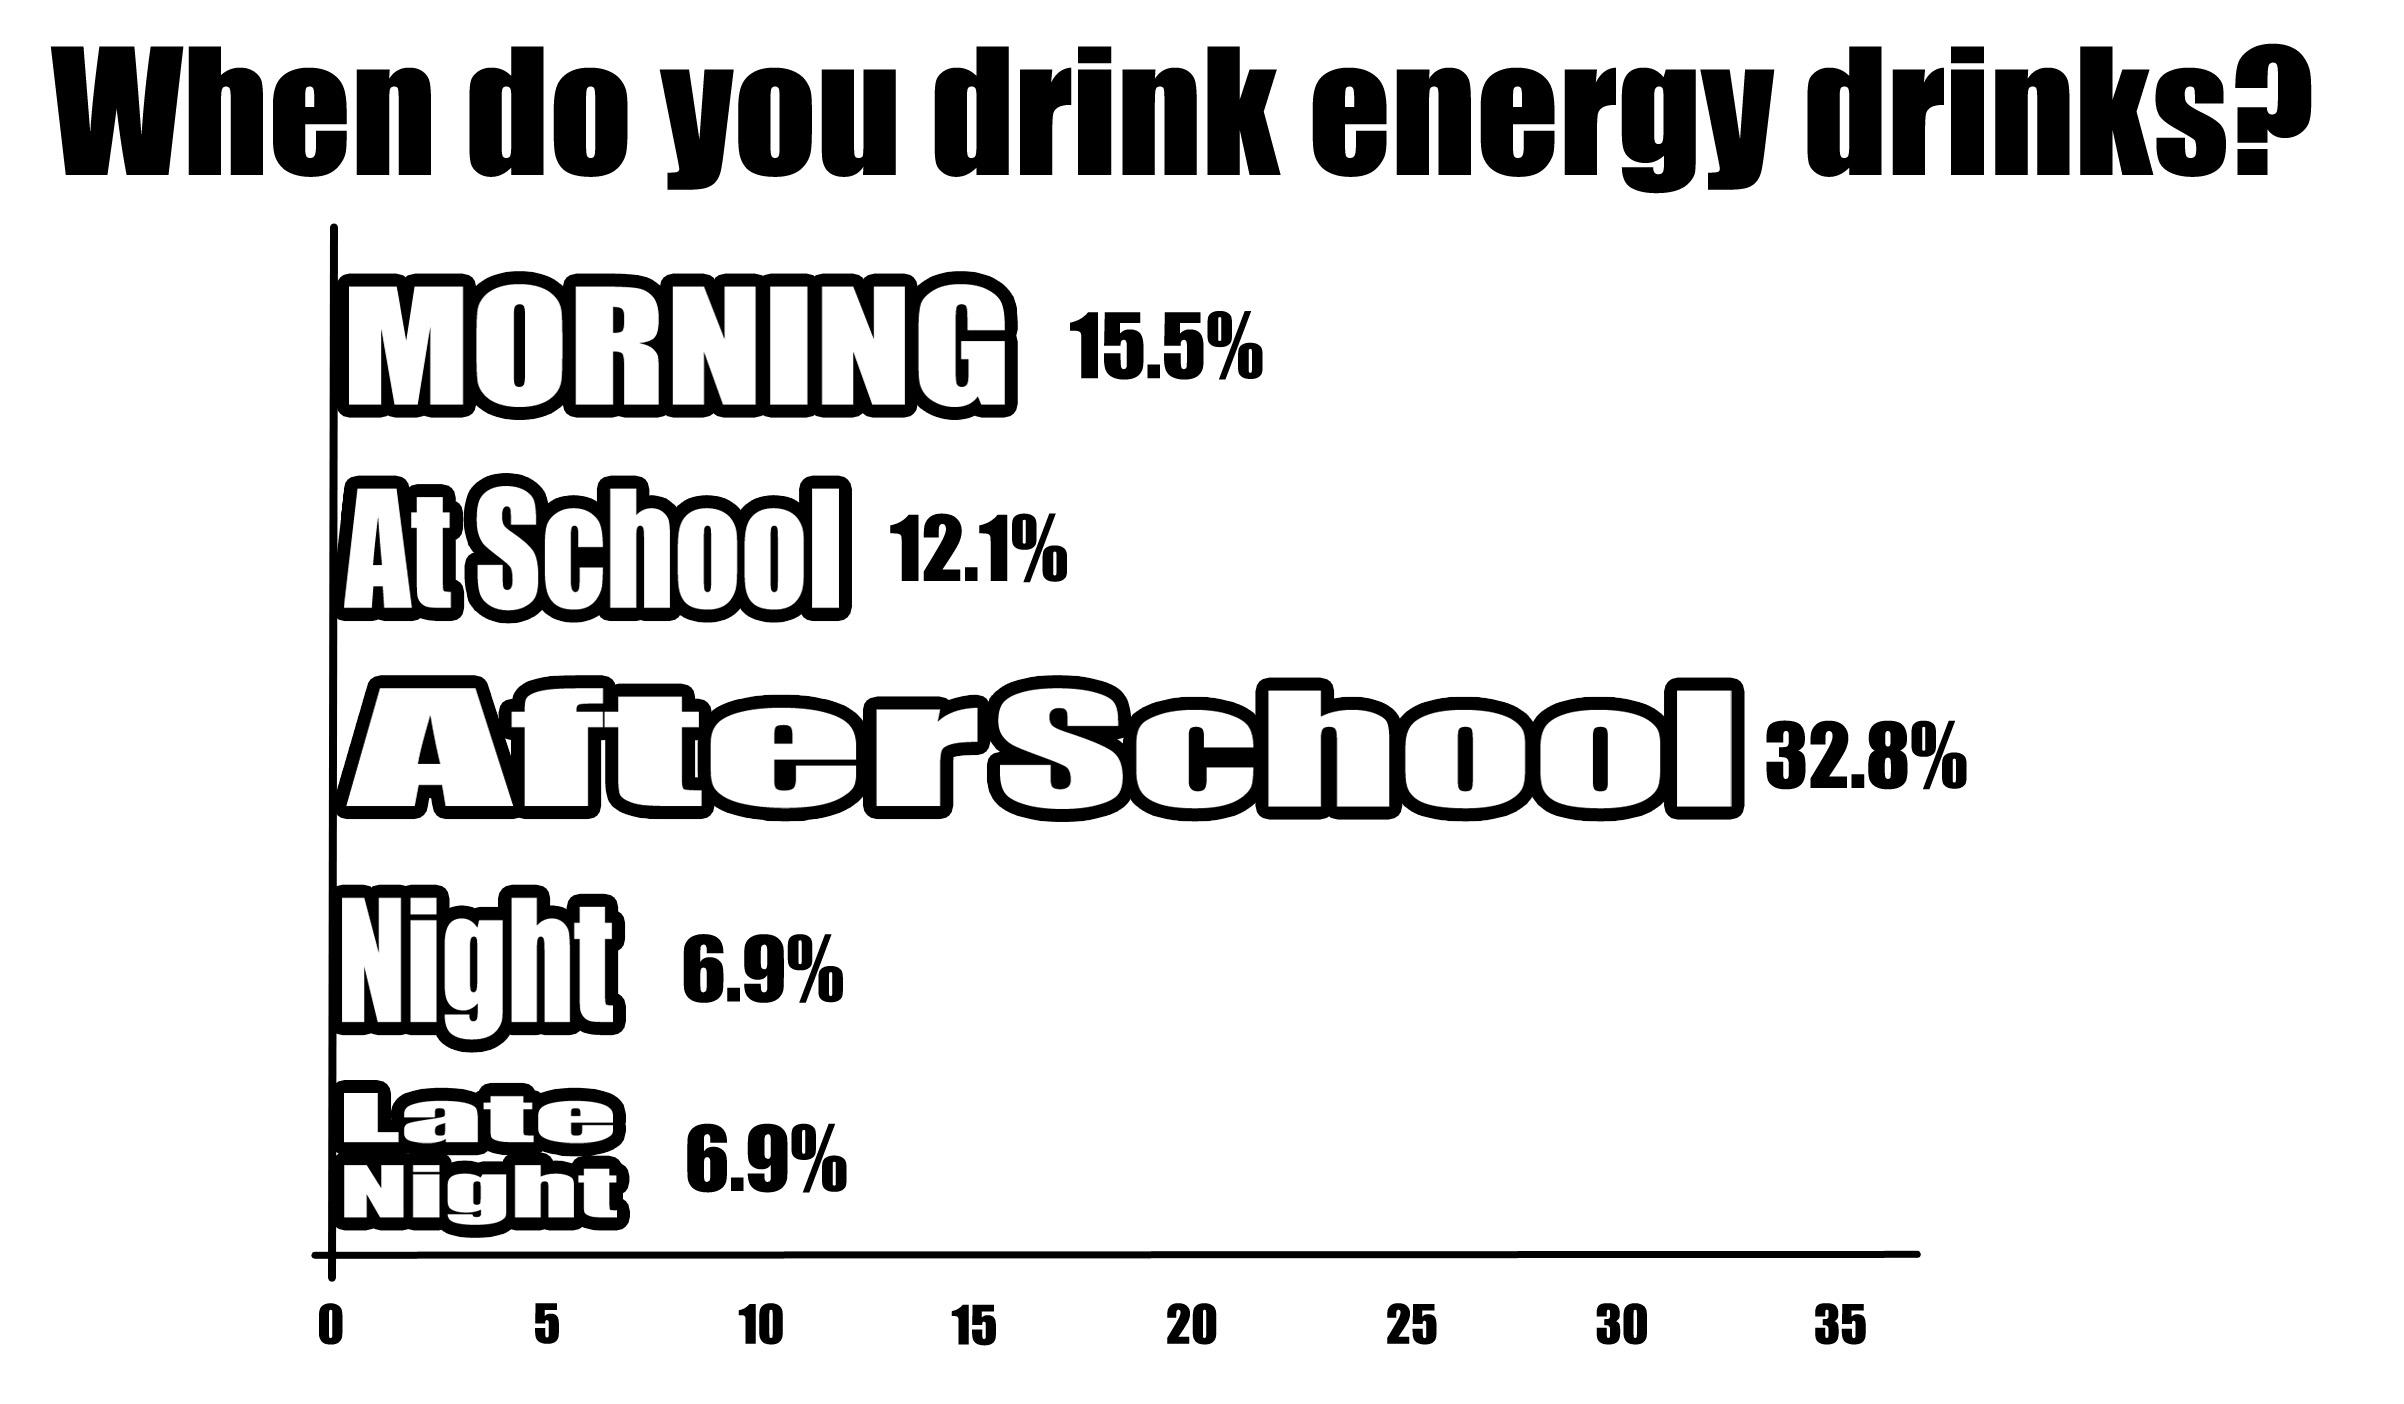 A survey of energy drink consumption patterns among college students